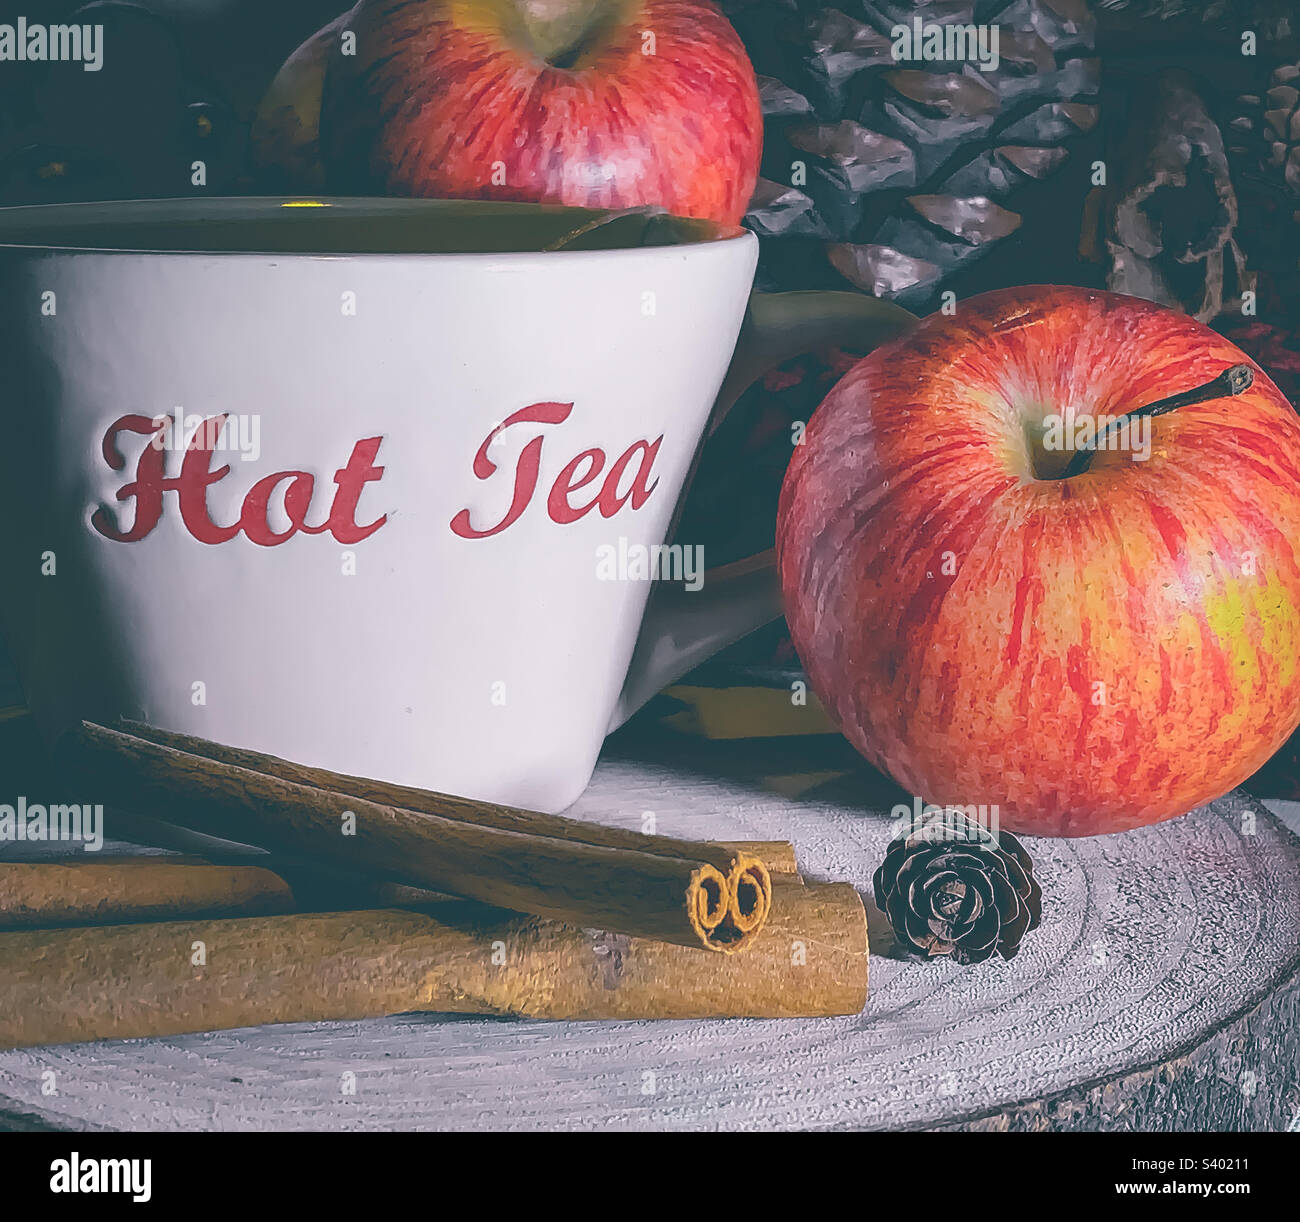 Apple & Cinnamon tea, shown with fruit, spice and pinecones on a wooden platter Stock Photo